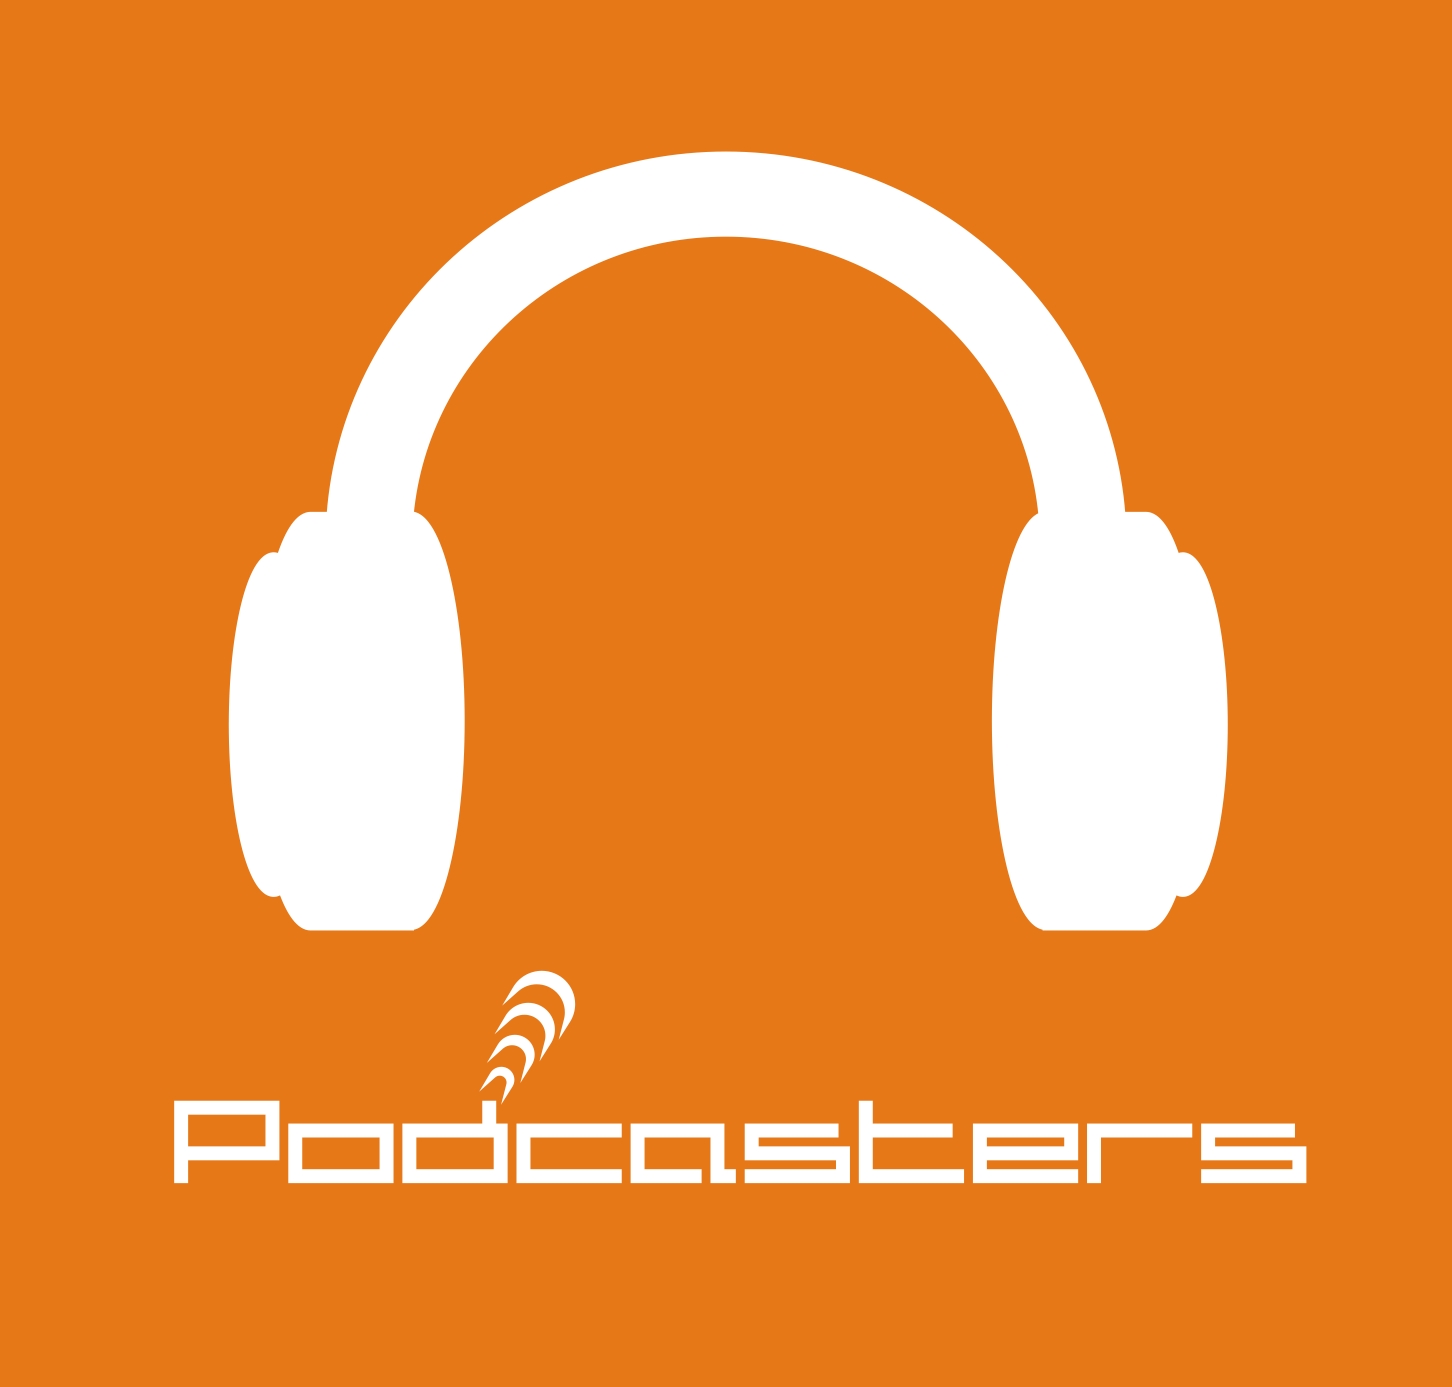 podcasters wallpaper oficial logotheque logo dvd video wallpapers ...